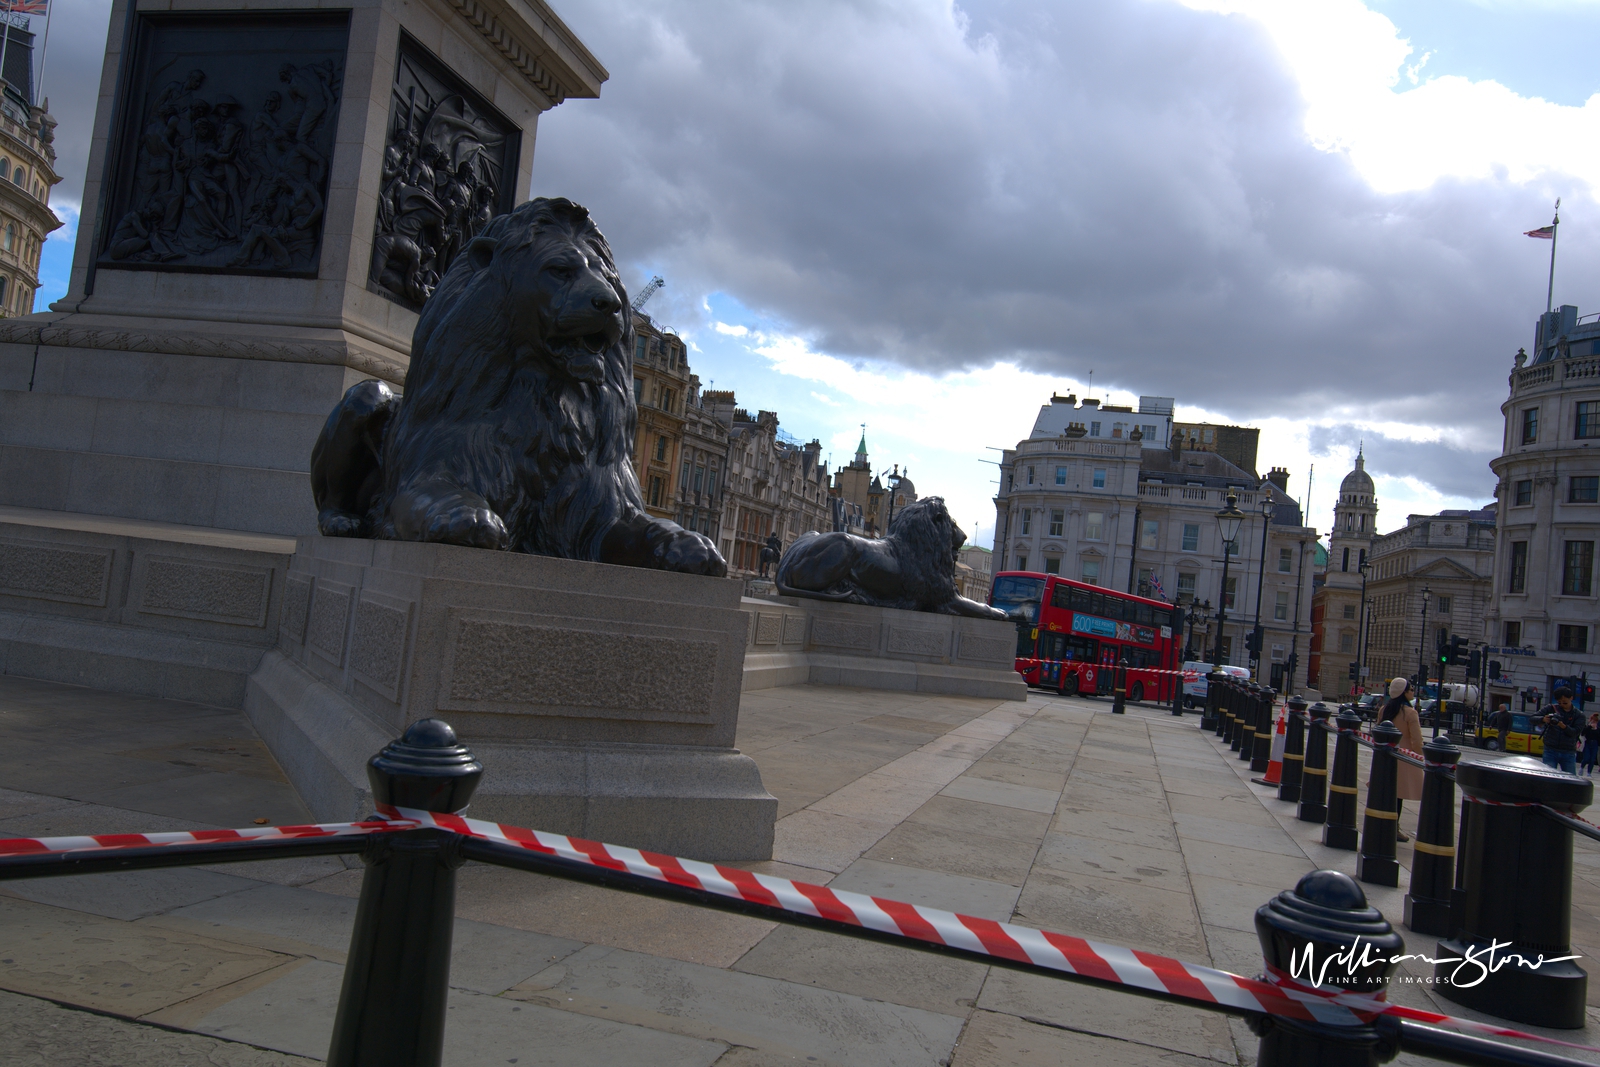 Fine Art, Limited Edition, Red Taped Lion, London.